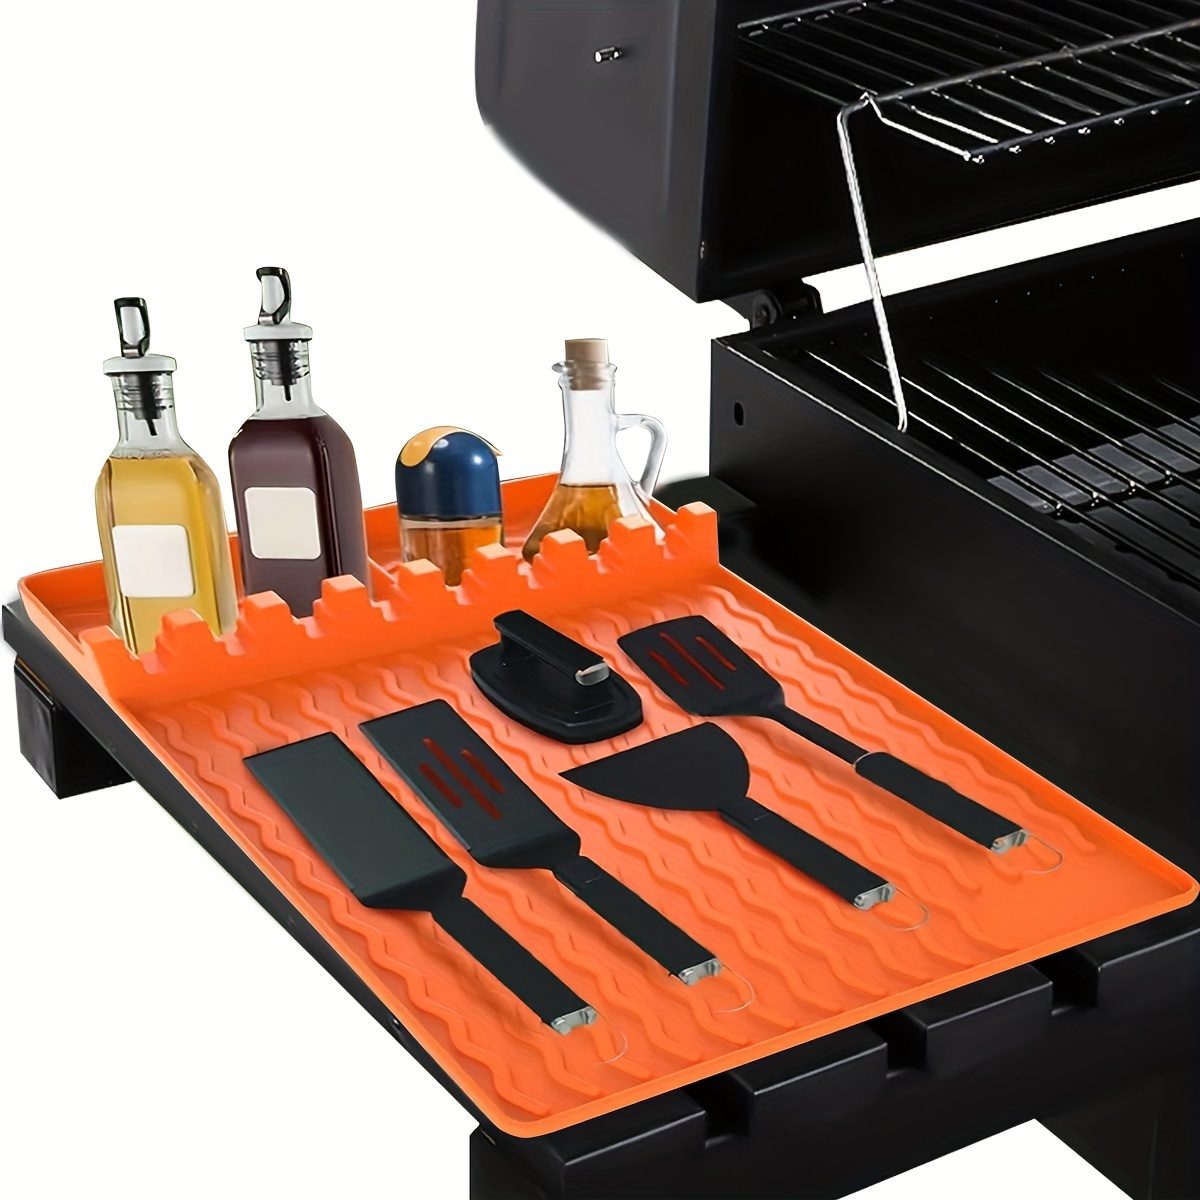 

Bbq Silicone Side Rack Mat For Blackstone, Outdoor Patio Household Mat, High-temperature Resistant Nonstick Drainer Mat, Silicone Bbq Tool Mat, Bbq Grill Accessories, Multi-purpose Grill Mat